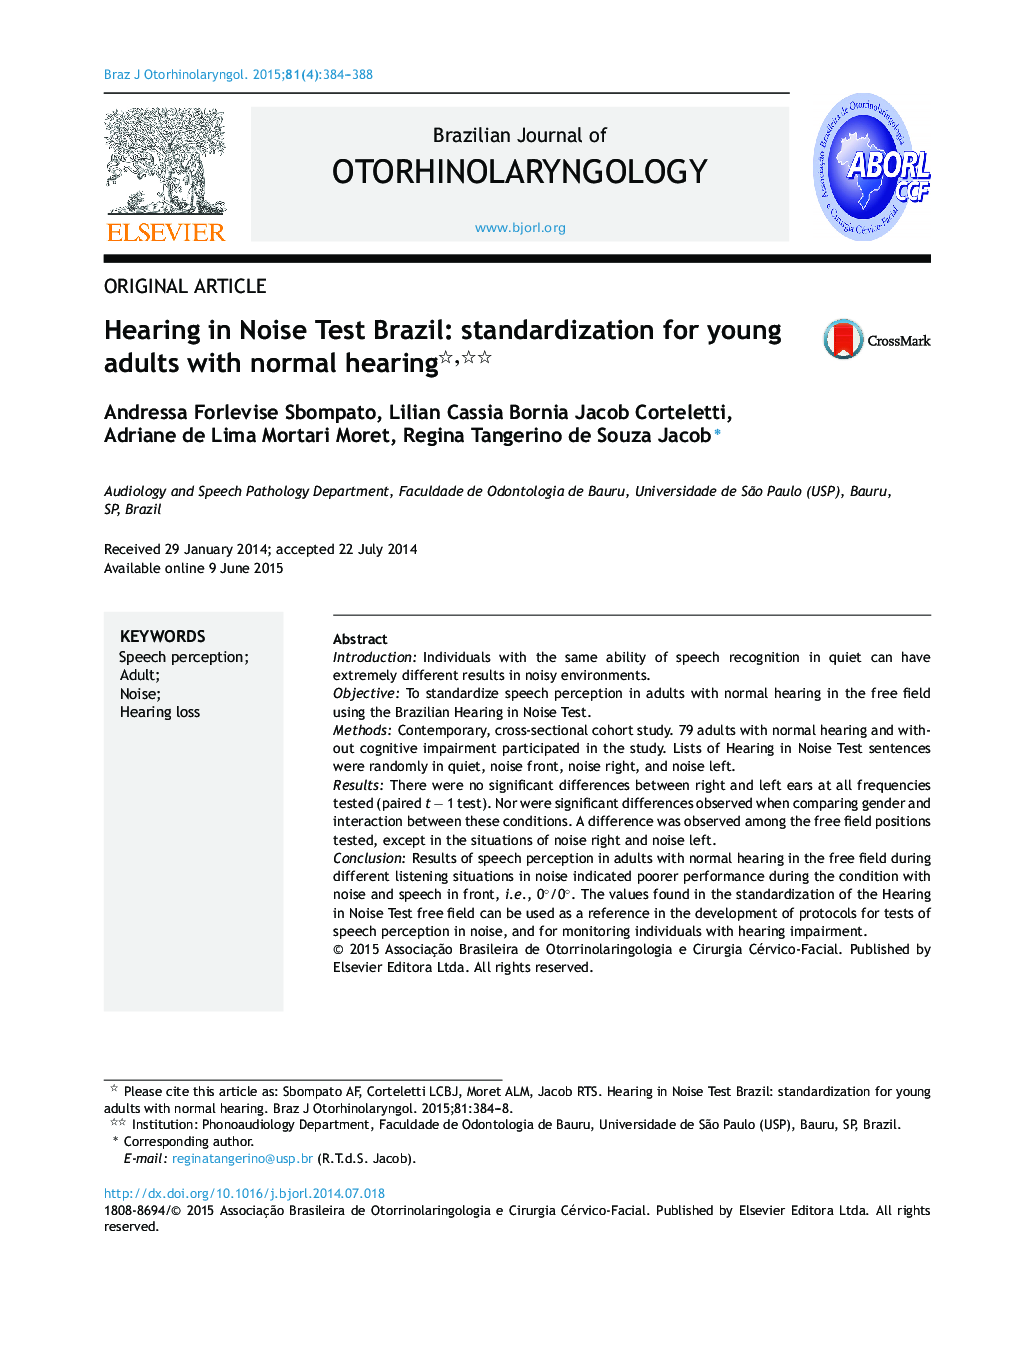 Hearing in Noise Test Brazil: standardization for young adults with normal hearing 